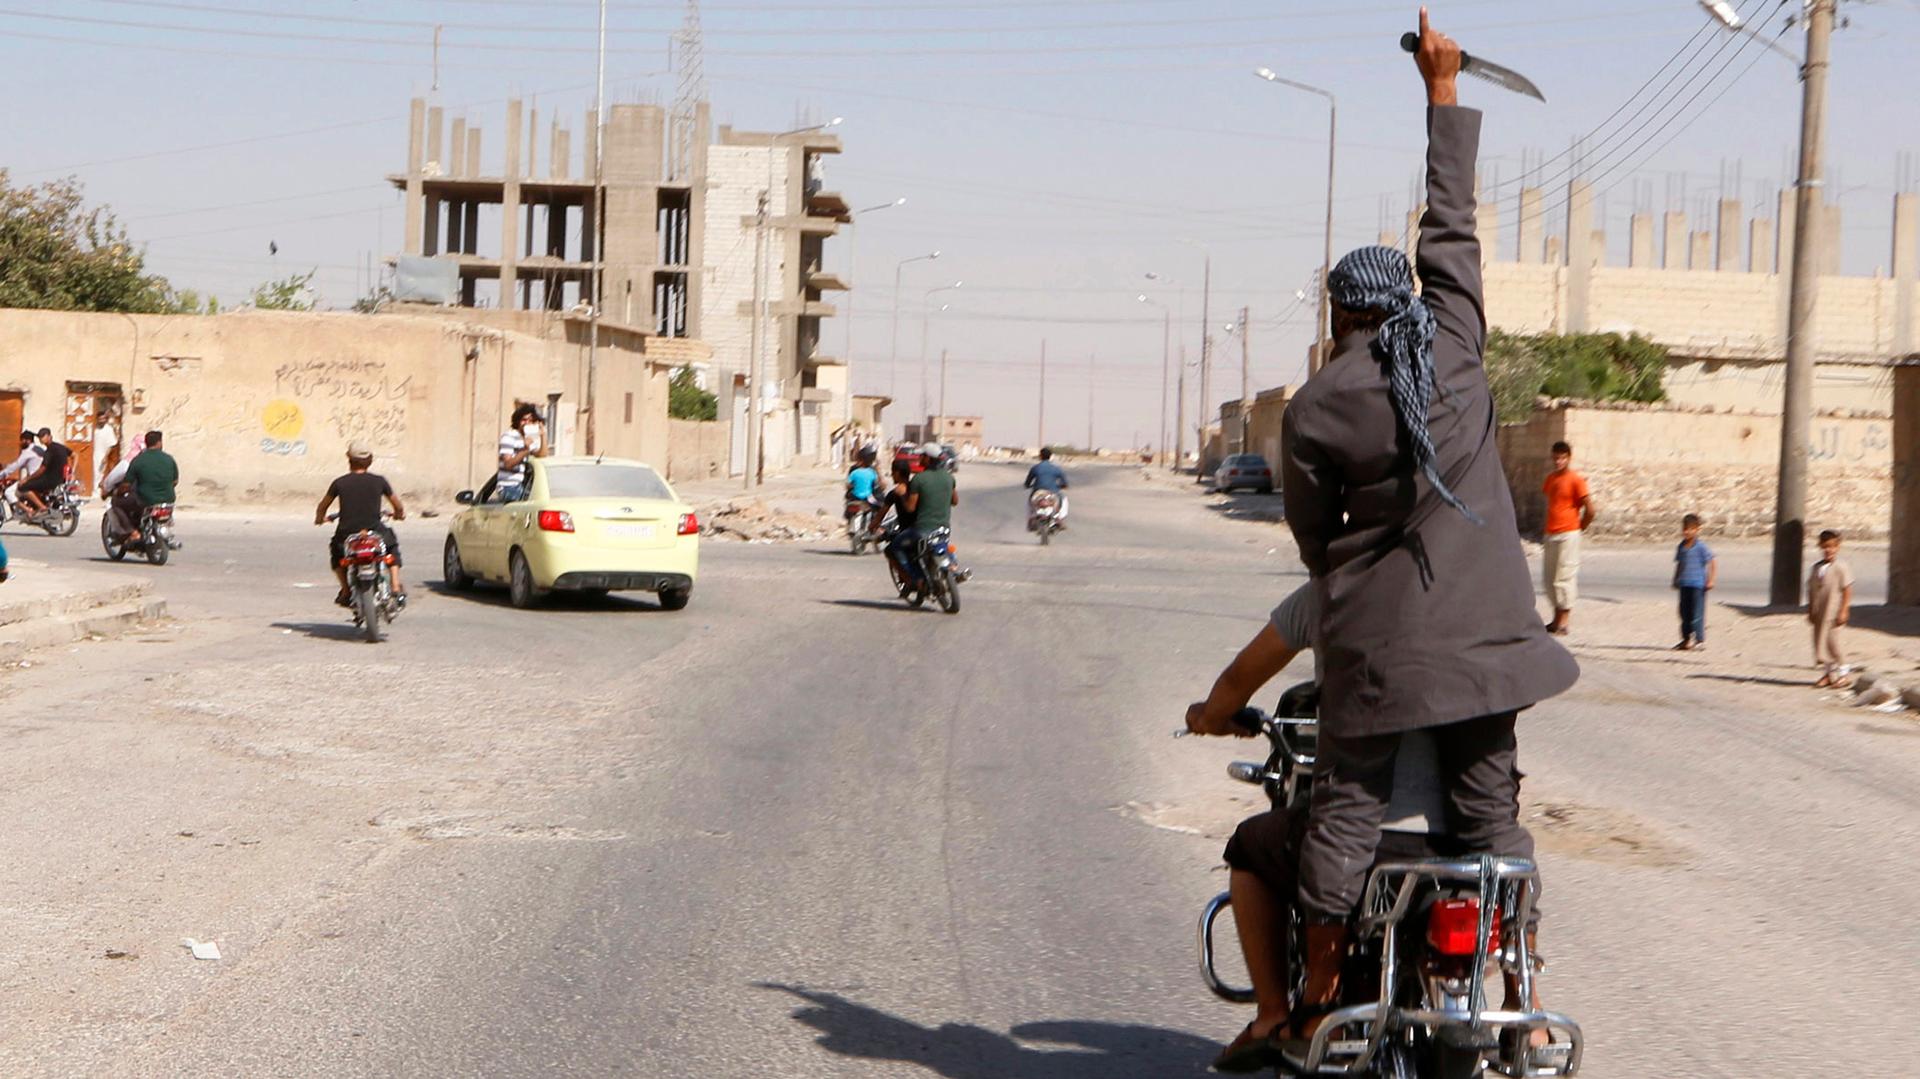 A man holds up a knife as he rides on the back of a motorcycle touring the streets of Tabqa in celebration after ISIS militants took over Tabqa air base in Syria, on August 24, 2014.